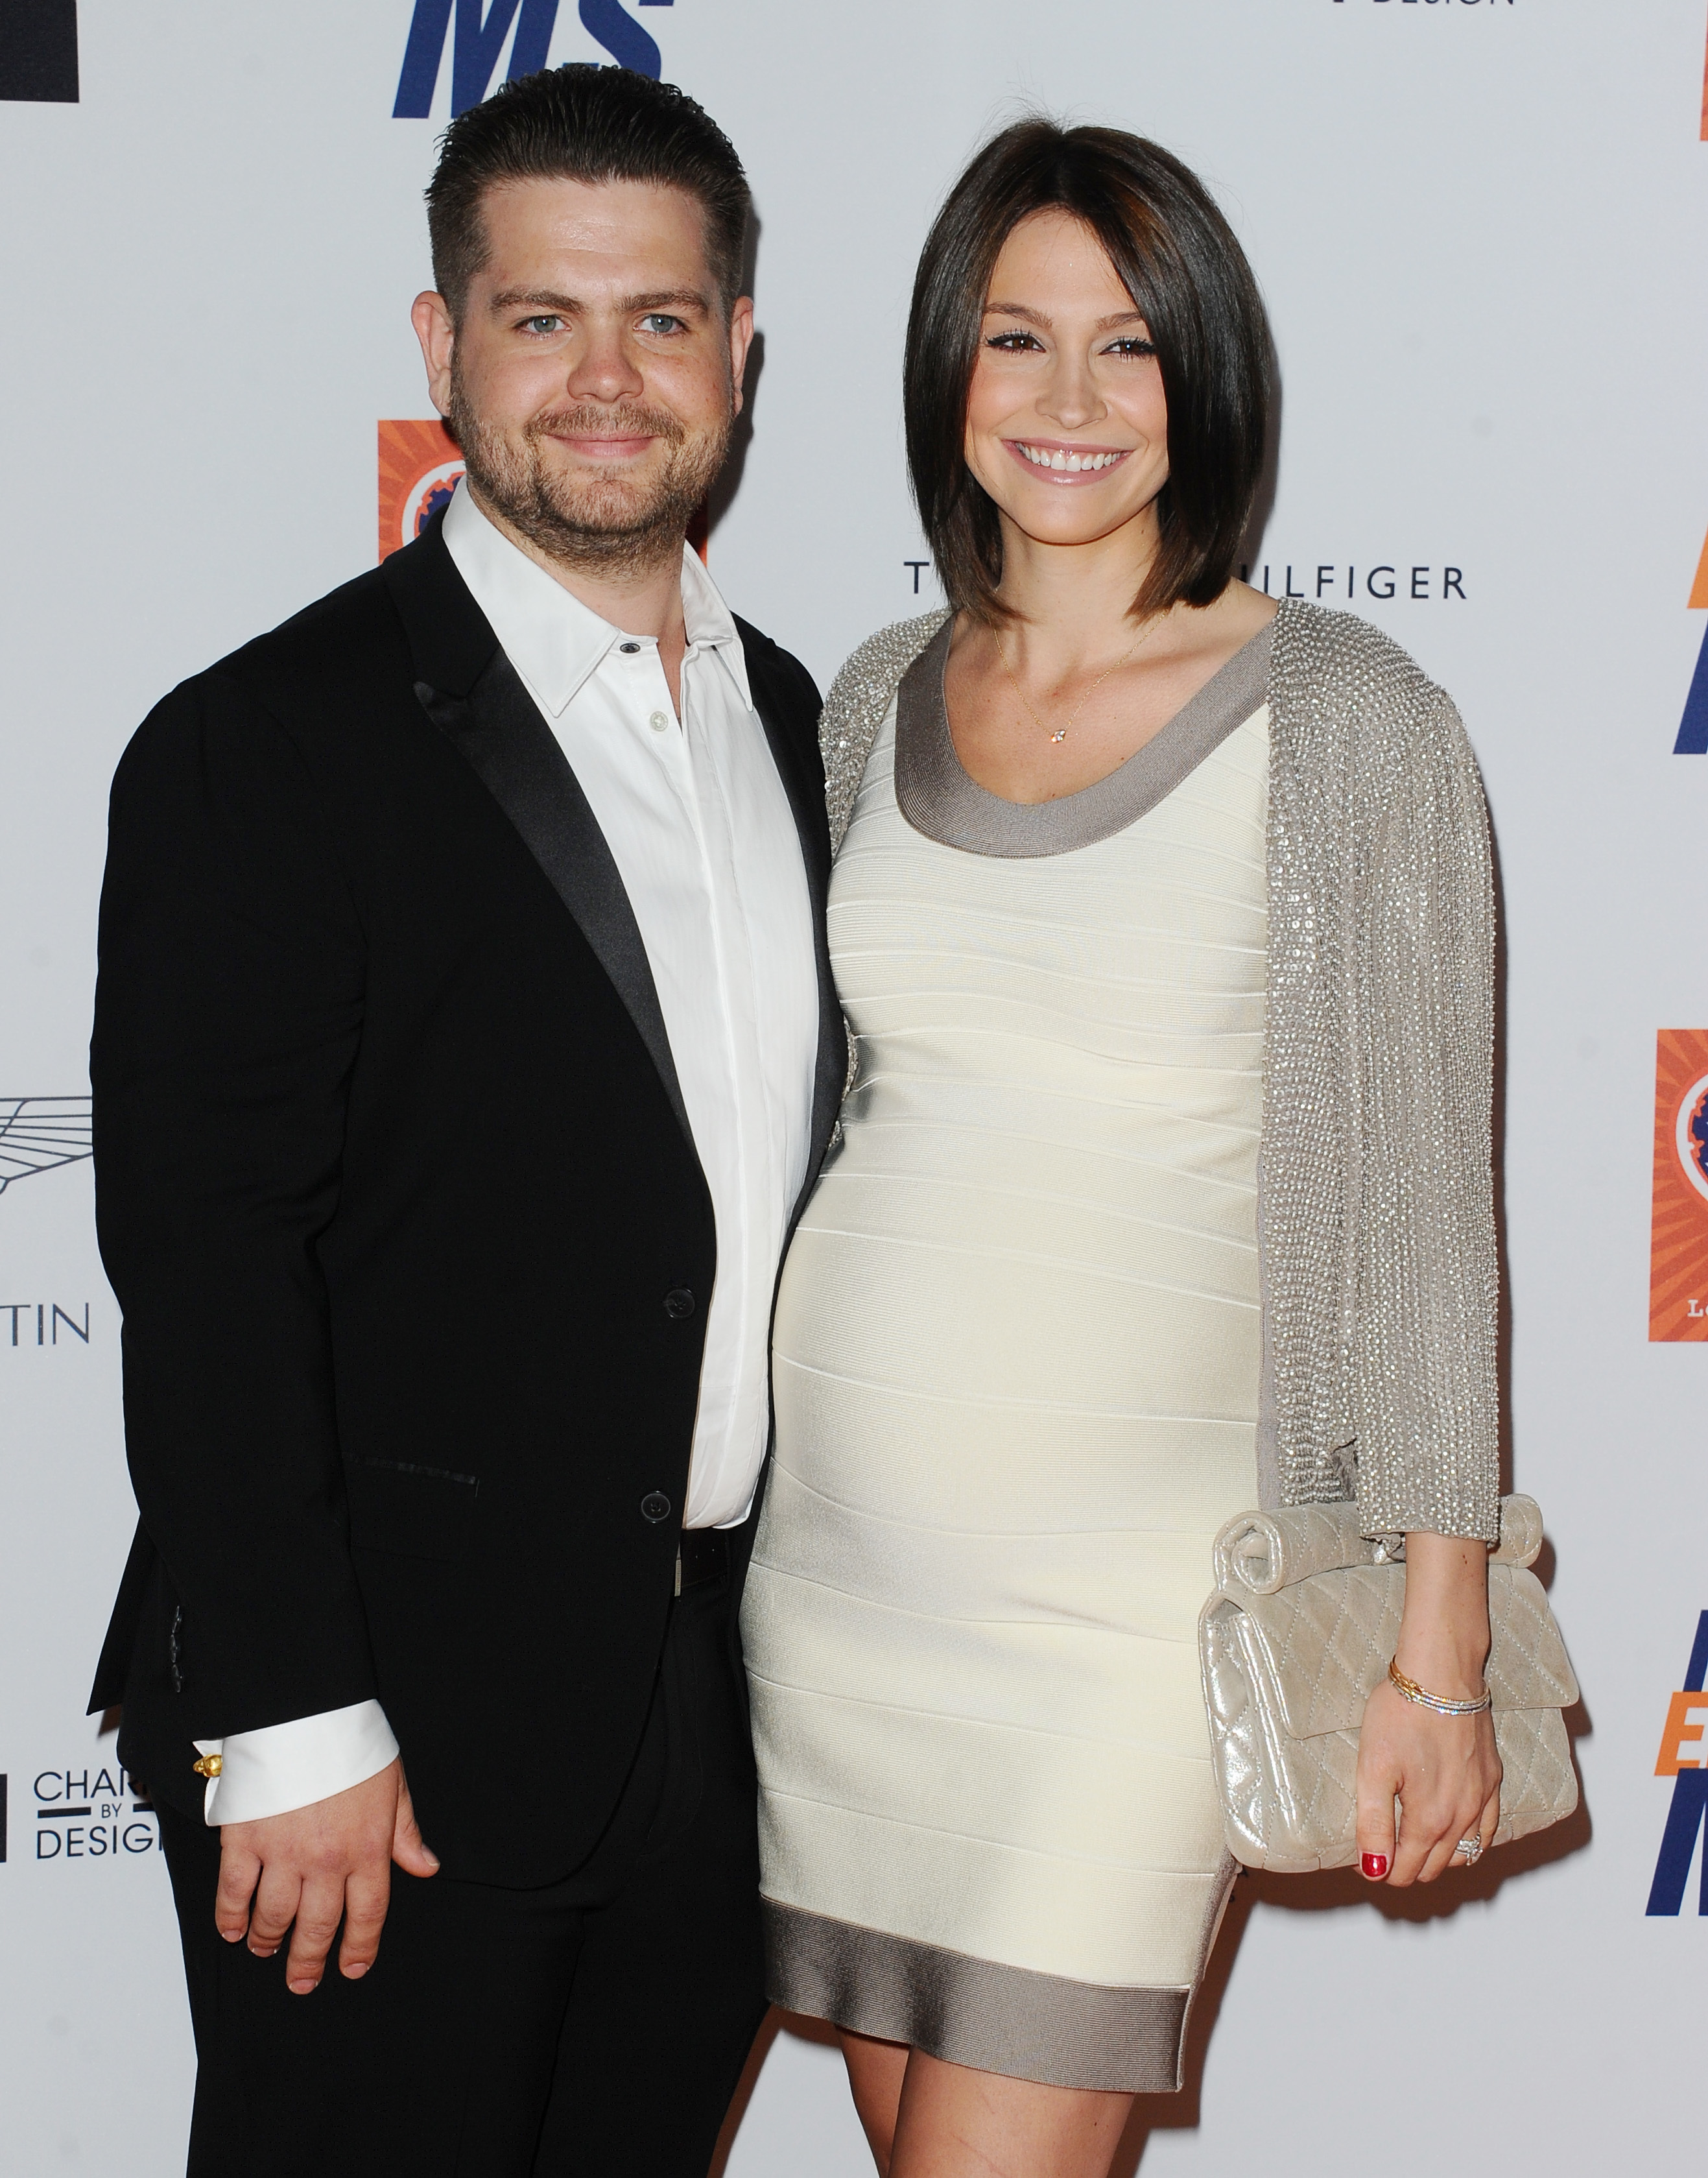 <p>Fans were shocked when Jack Osbourne and Lisa Stelly called it quits in May 2018 -- just three months after the birth of their third daughter, Minnie. It turns out the seemingly happy couple had been fighting for years, and another woman may have been the final straw in their relationship. In April 2018, Jack was spotted outside a hotel with Julie Andrews' granddaughter, Katyi Andrews. The two were former friends who reconnected and reportedly began an affair right before the divorce news went public.</p>